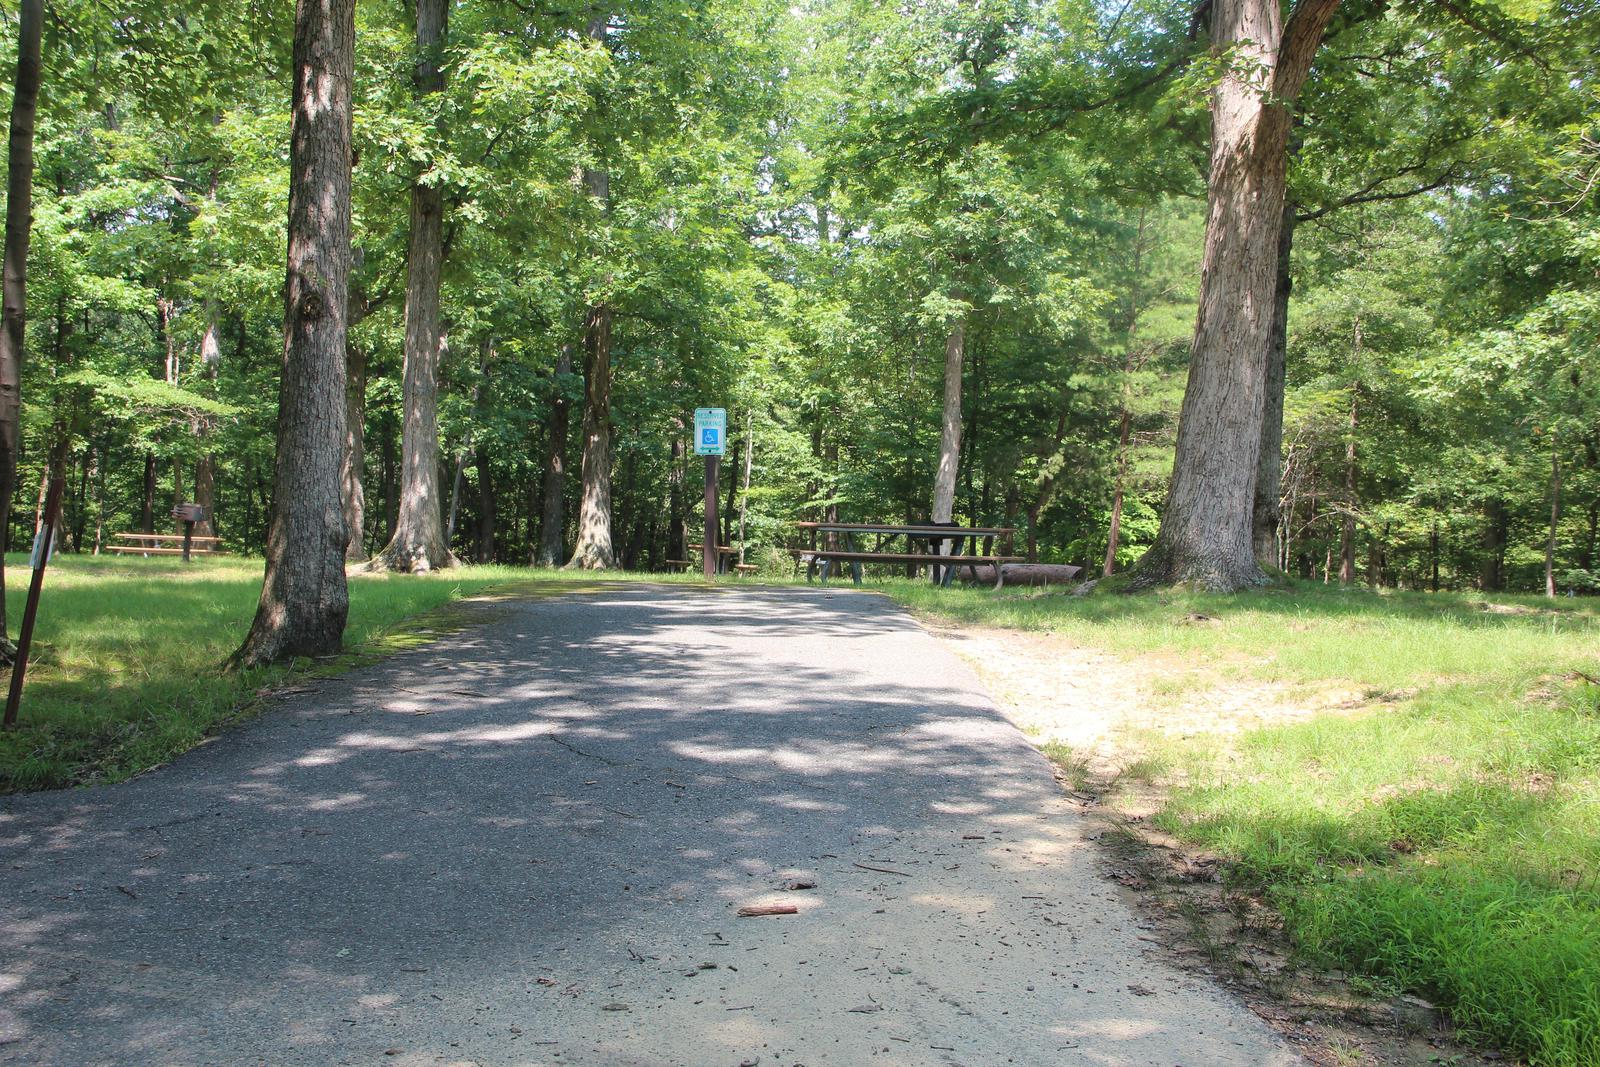 C106 C Loop of the Greenbelt Park Maryland campground